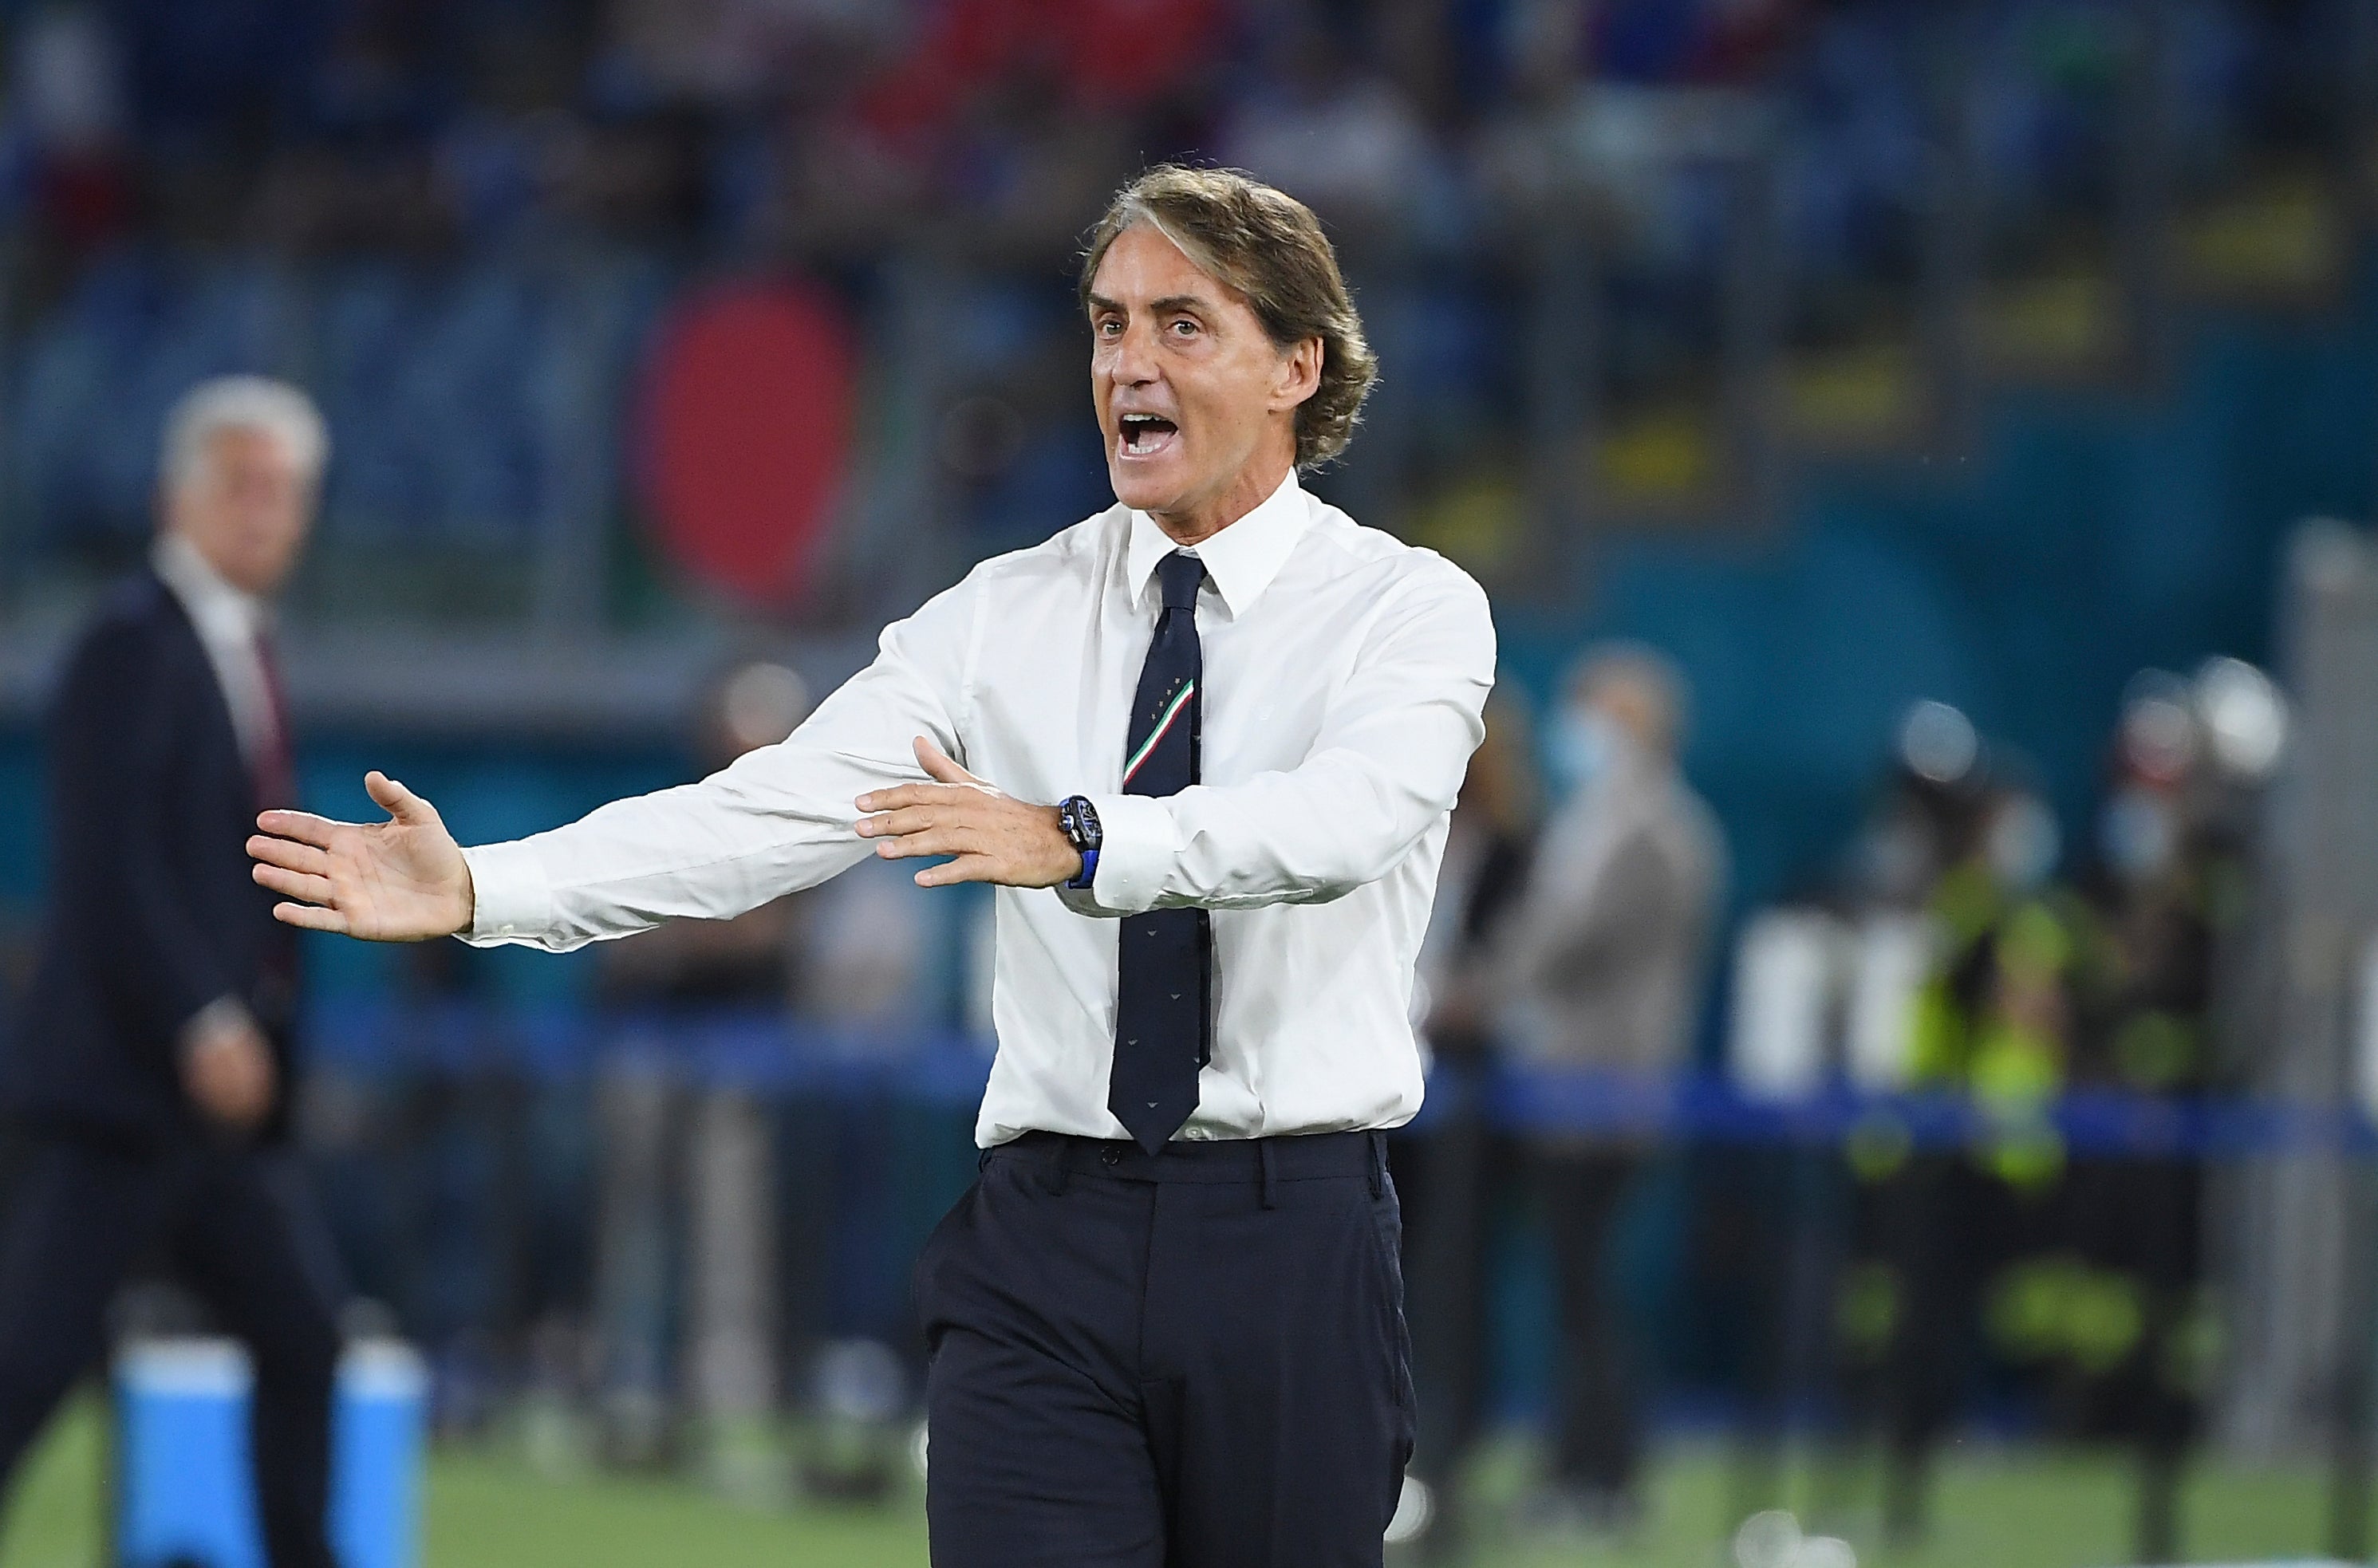 Roberto Mancini gestures on the touchline